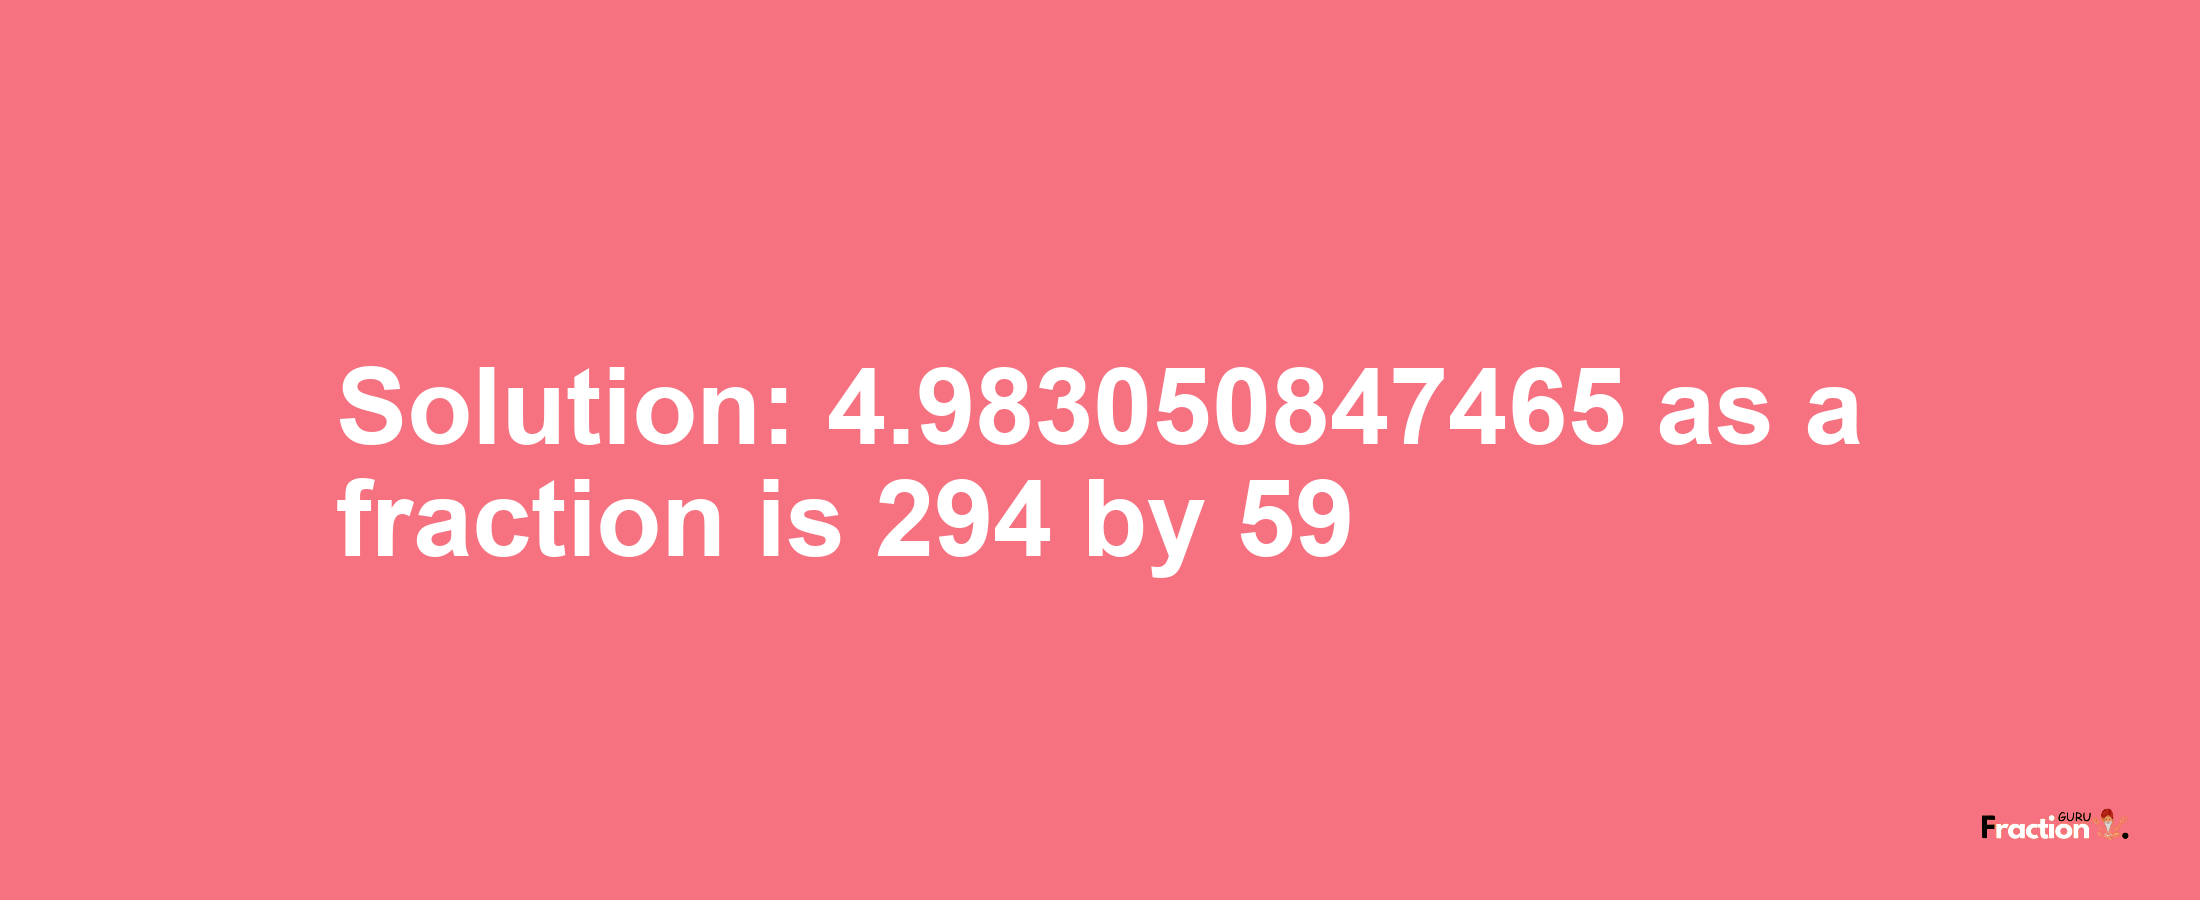 Solution:4.983050847465 as a fraction is 294/59